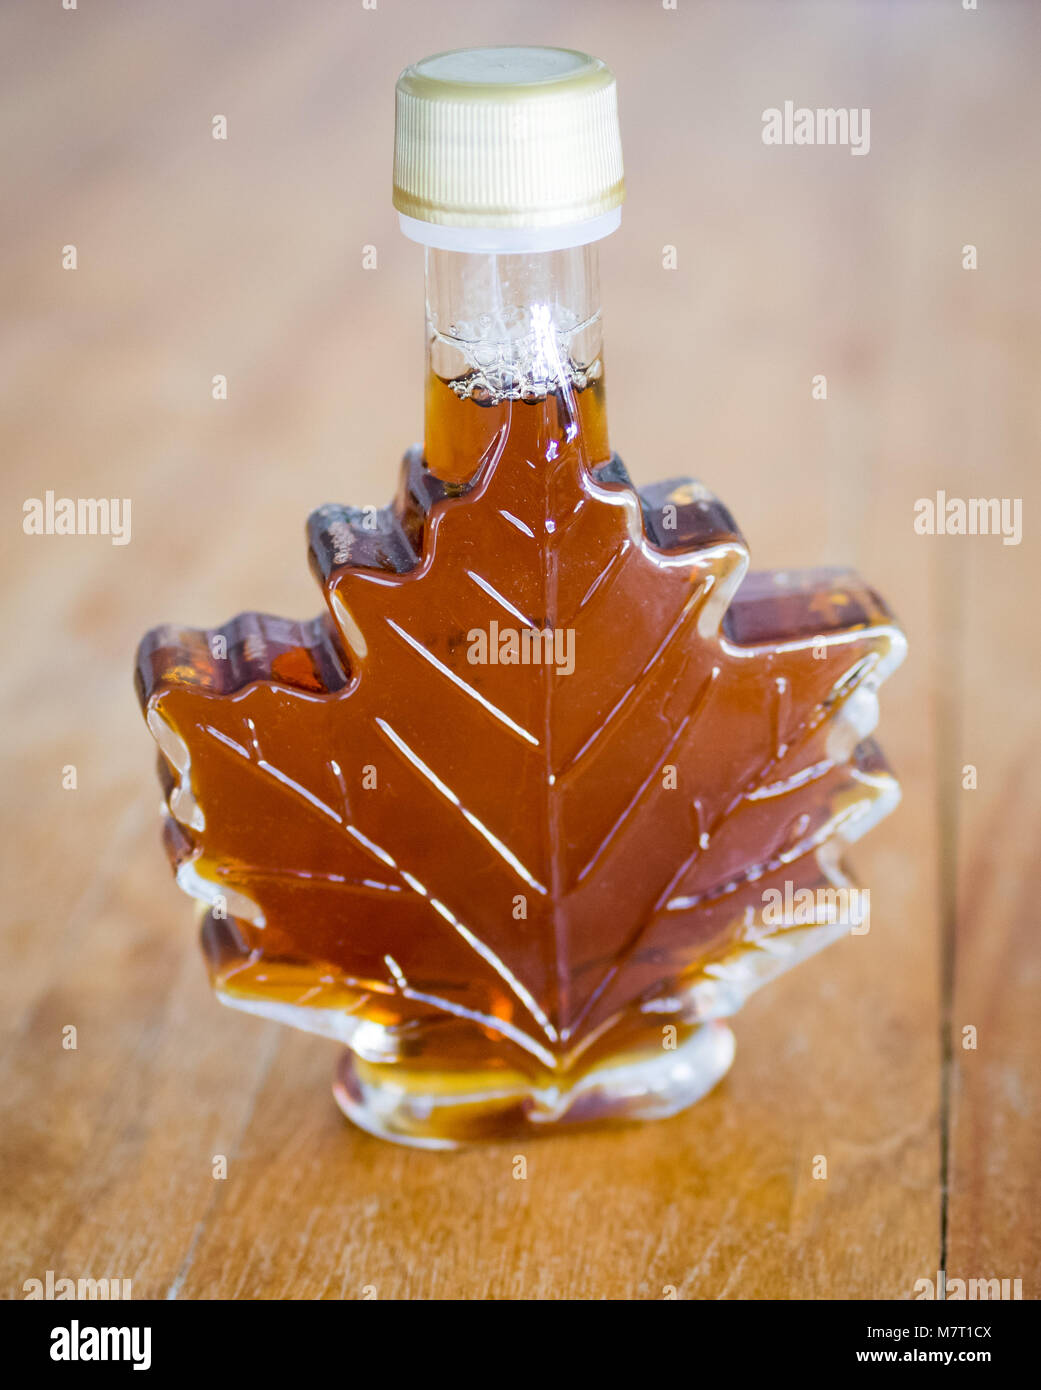 Download Maple Syrup Bottle High Resolution Stock Photography And Images Alamy Yellowimages Mockups